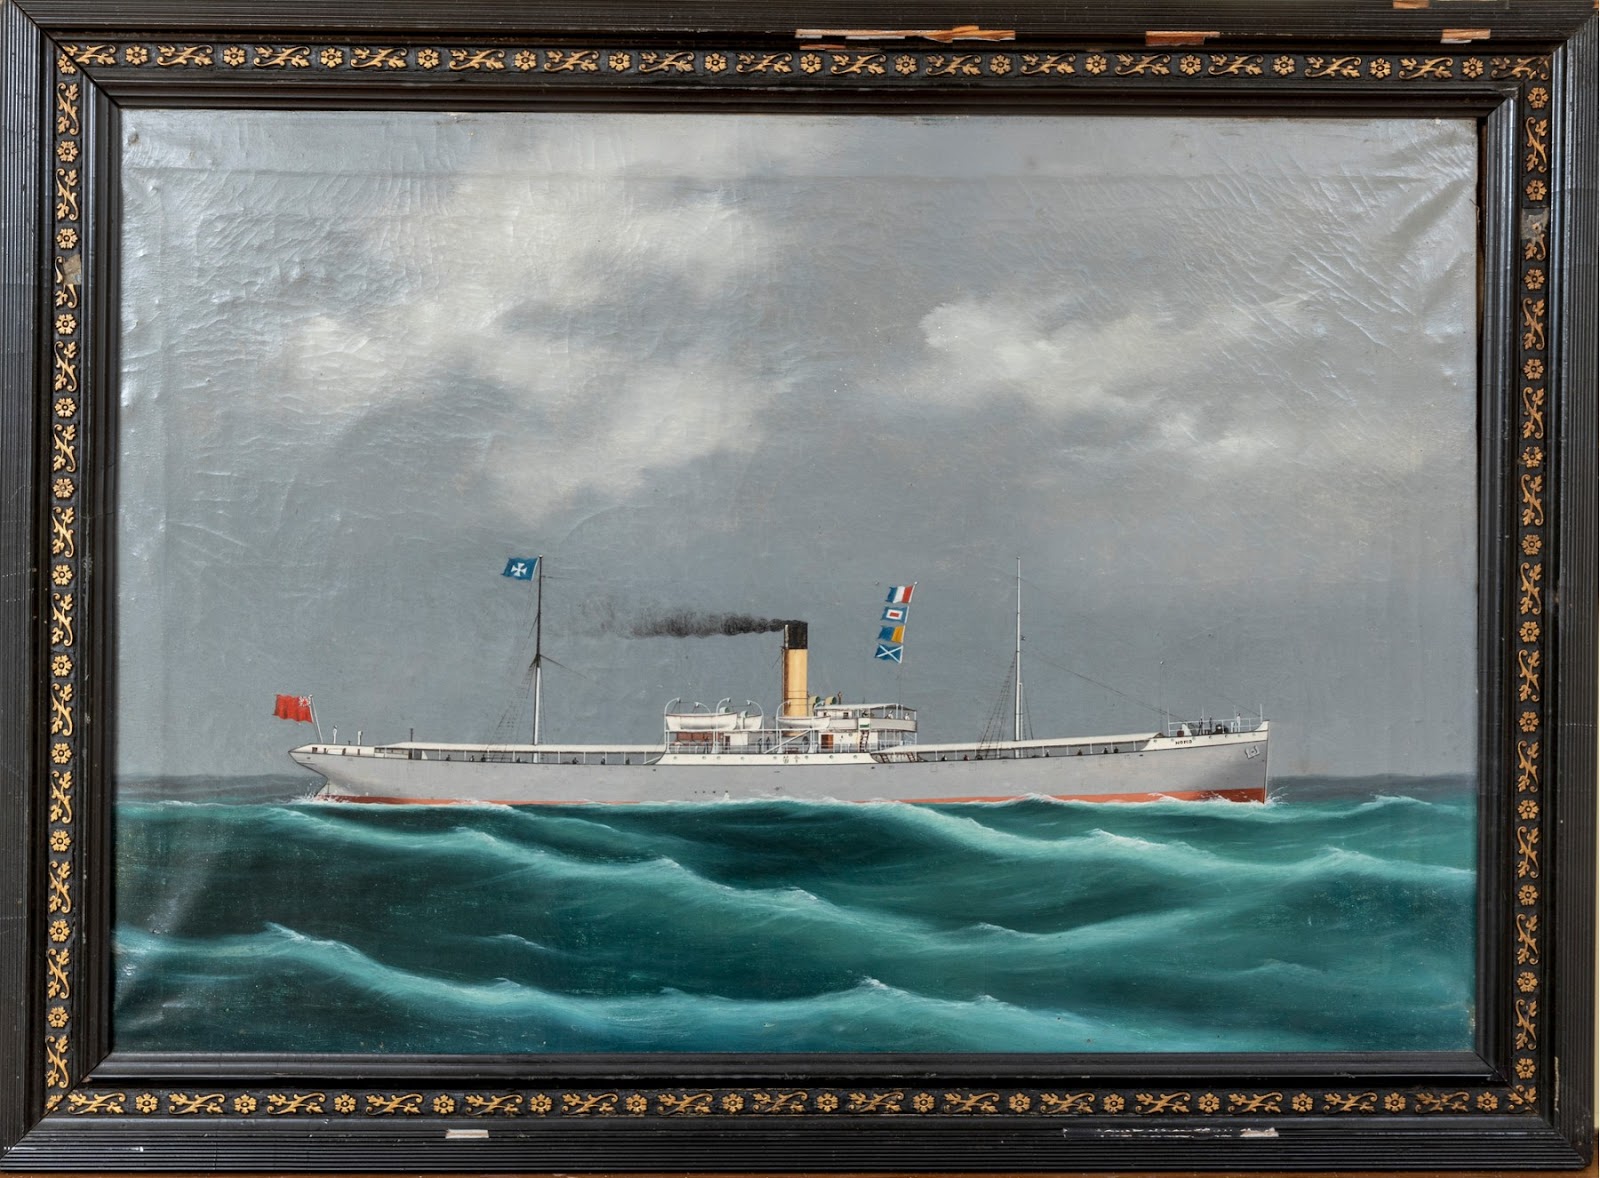 Antique Oil on Canvas with Steamship Nord